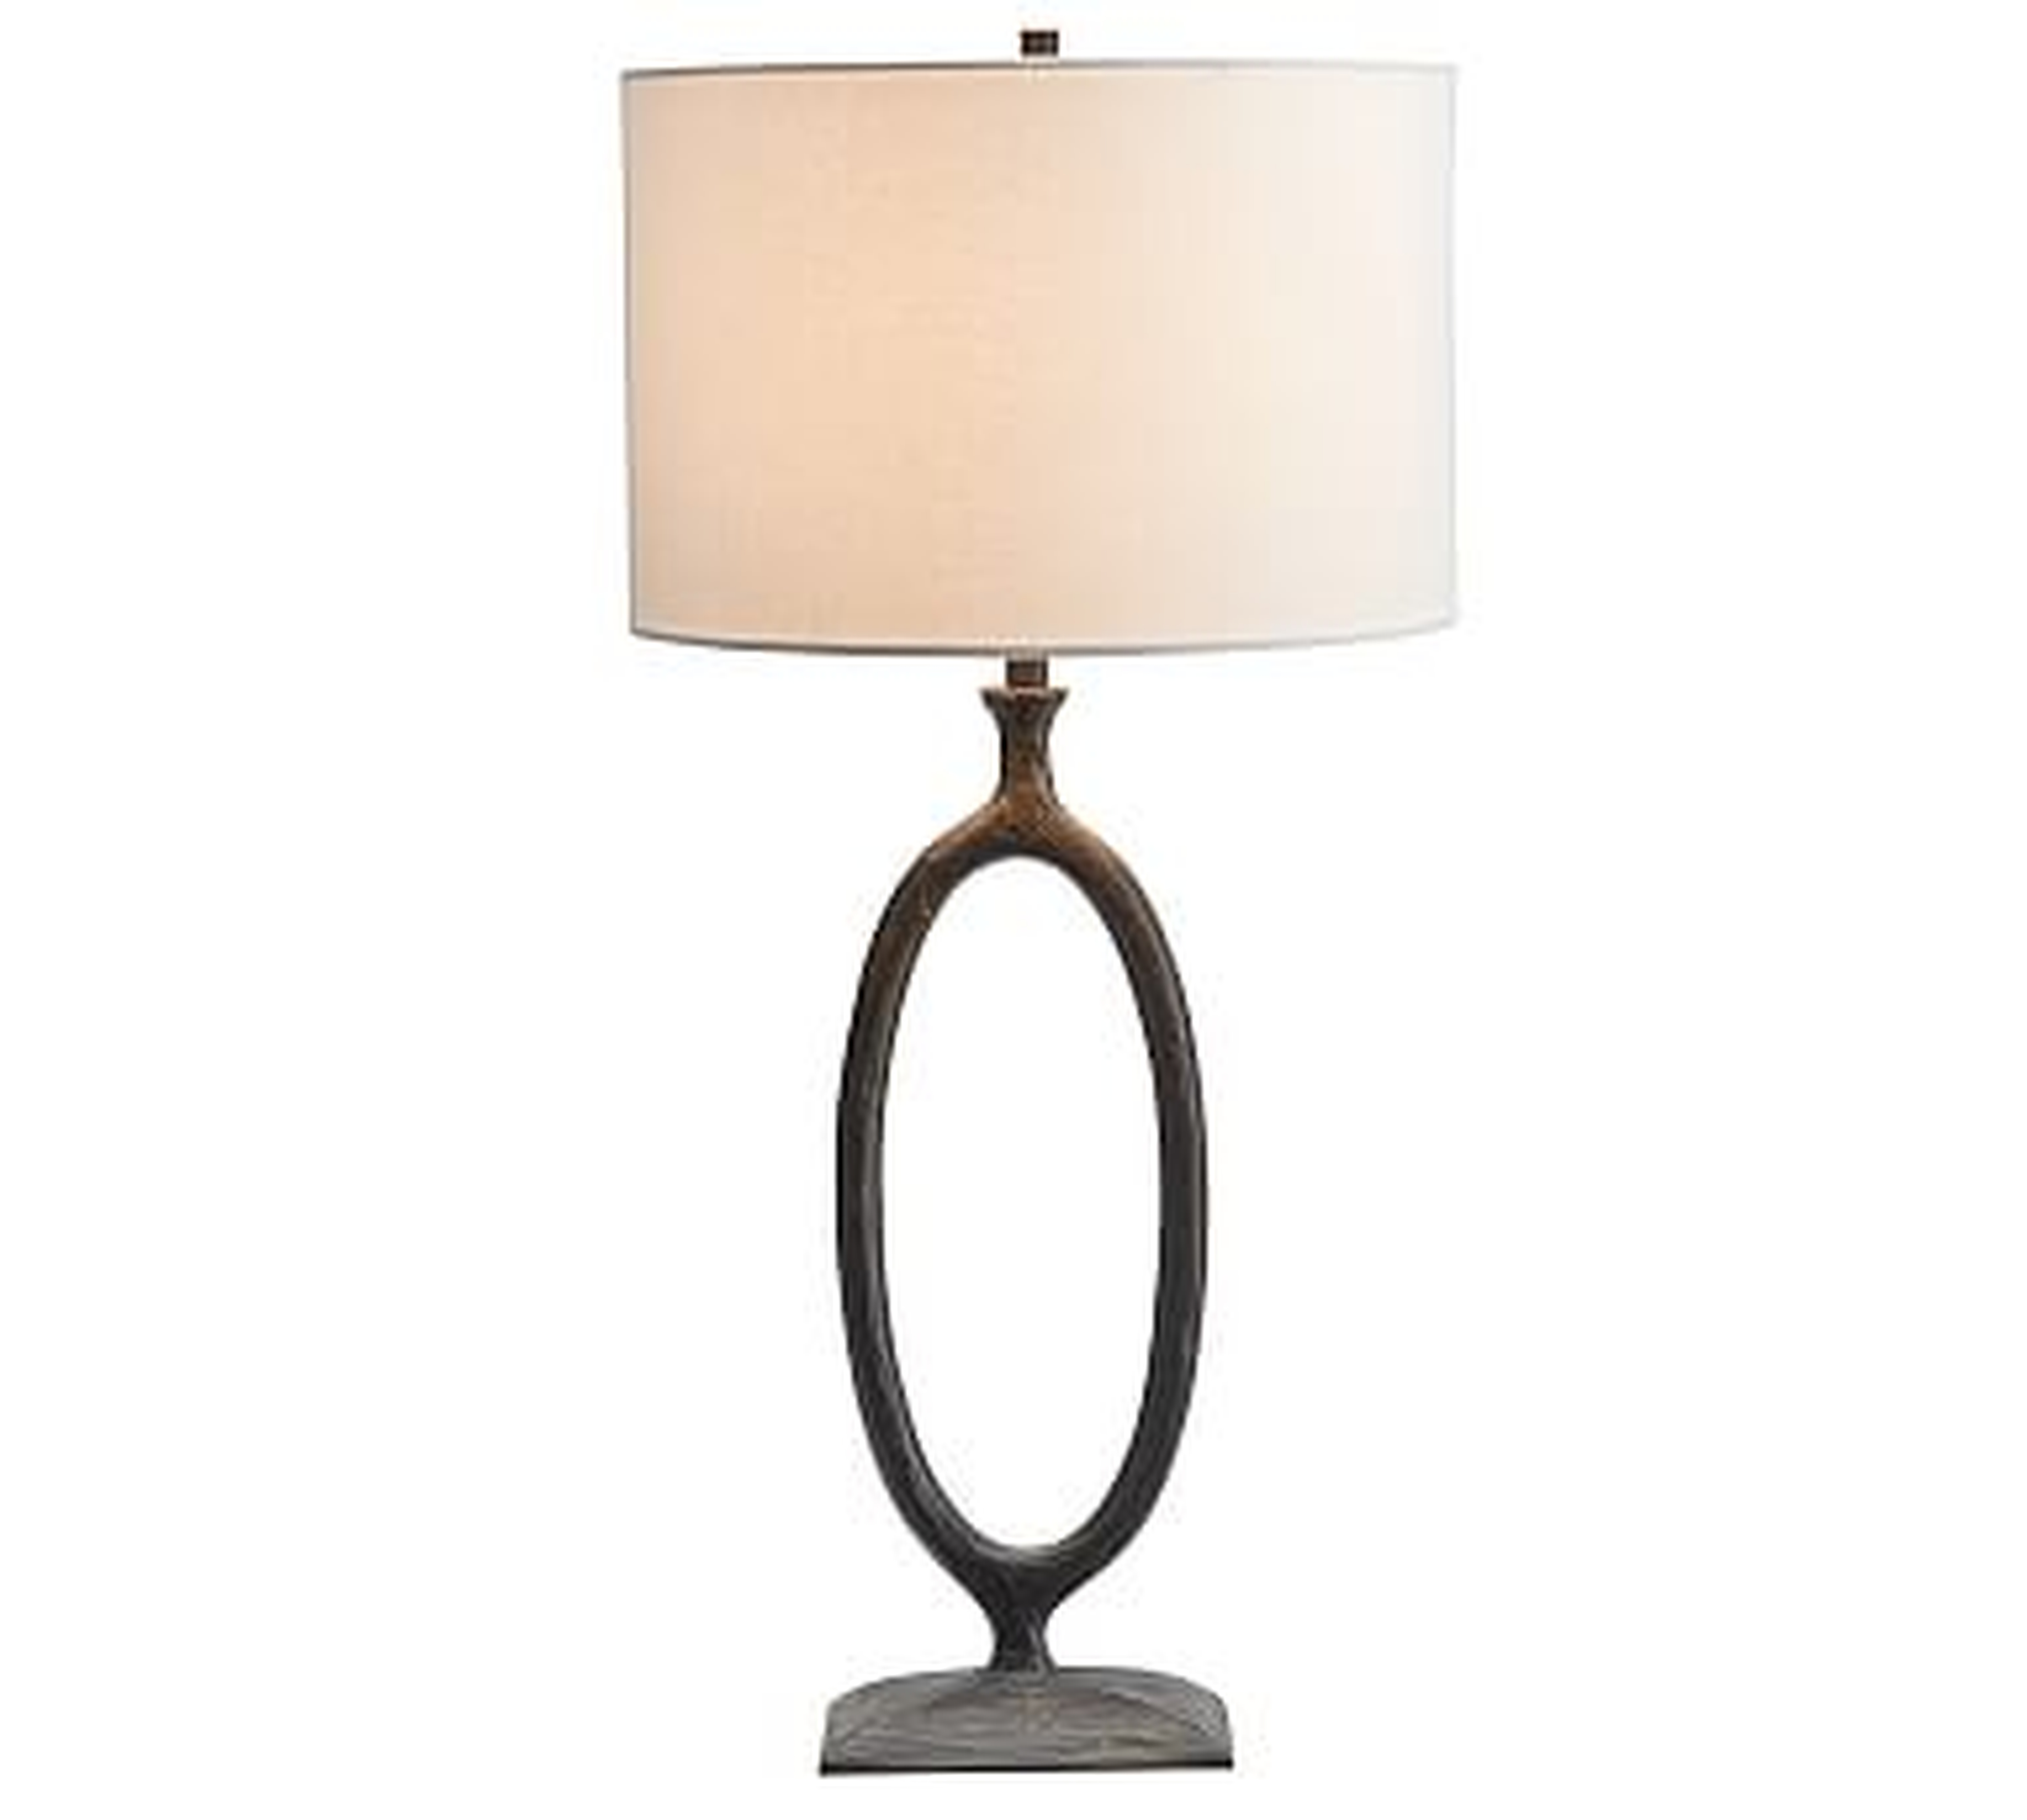 Easton Forged-Iron 23" Table Lamp, Bronze, Oval - Pottery Barn